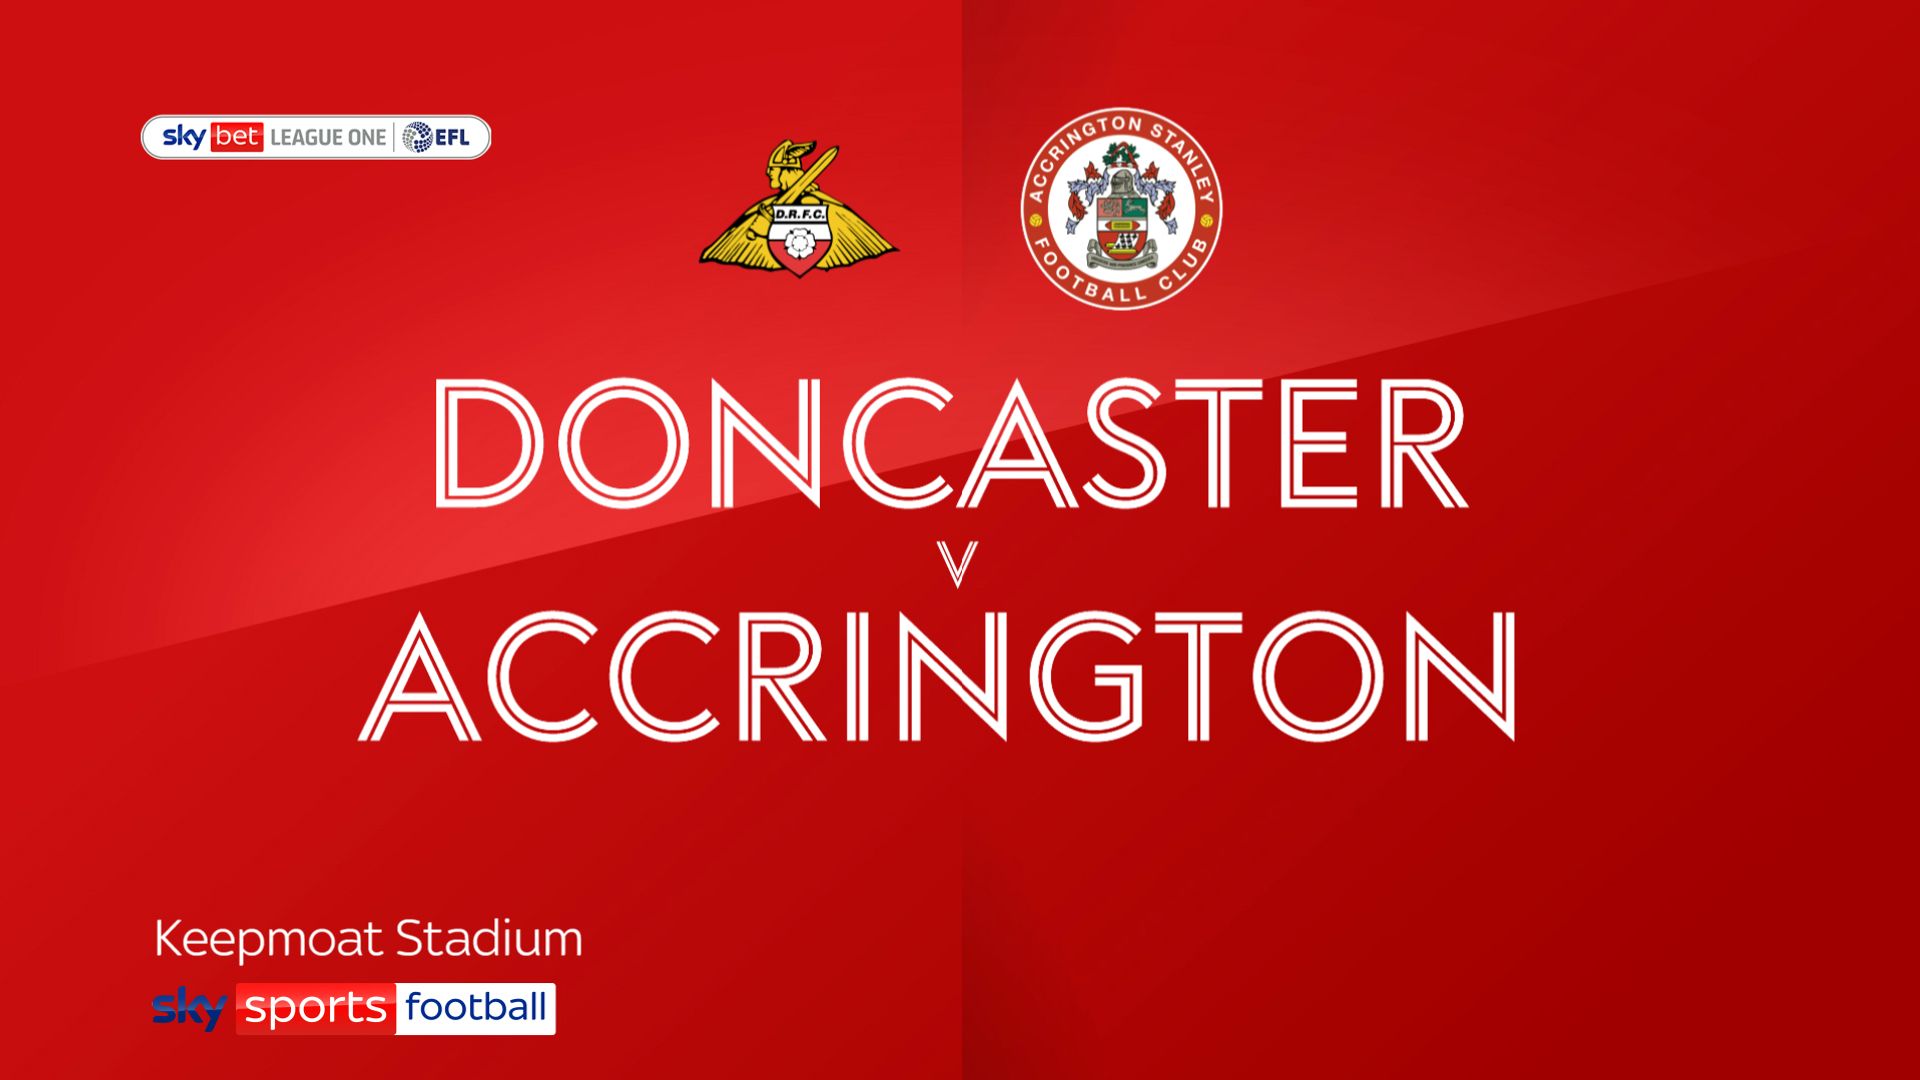 Doncaster see off Accrington to record vital win